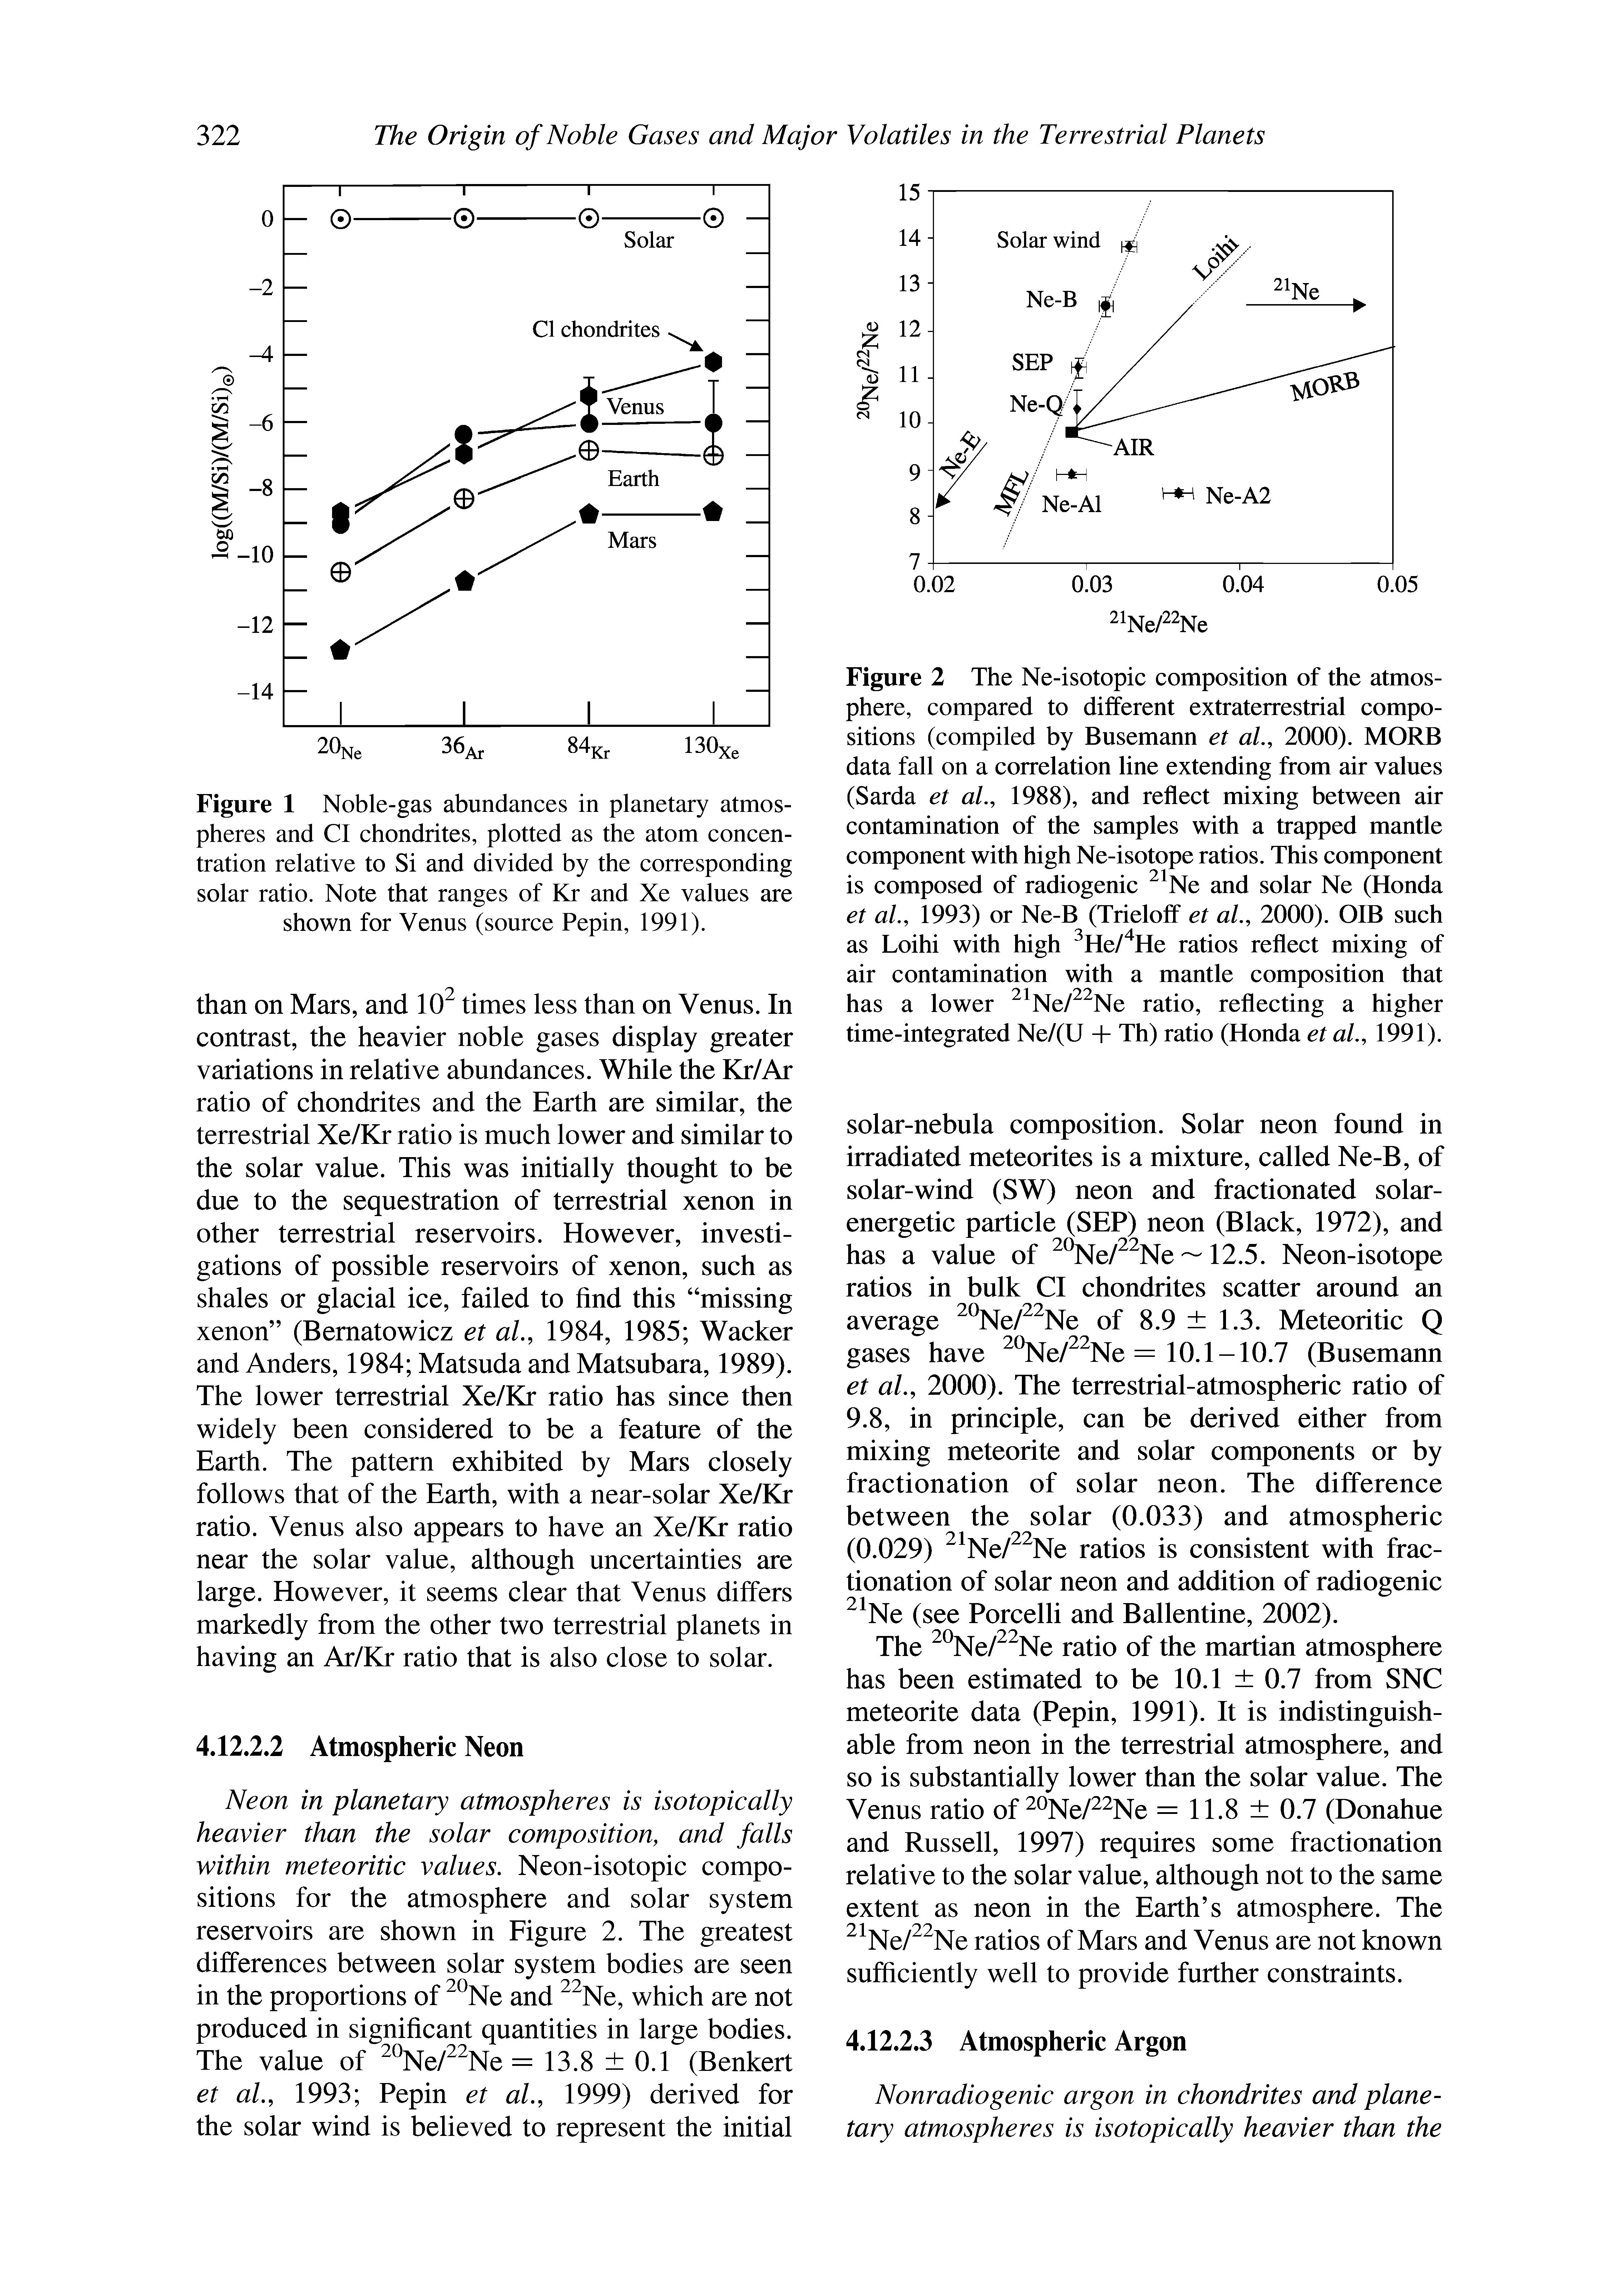 Figure 1 Noble-gas abundances in planetary atmospheres and Cl chondrites, plotted as the atom concentration relative to Si and divided by the corresponding solar ratio. Note that ranges of Kr and Xe values are shown for Venus (source Pepin, 1991).